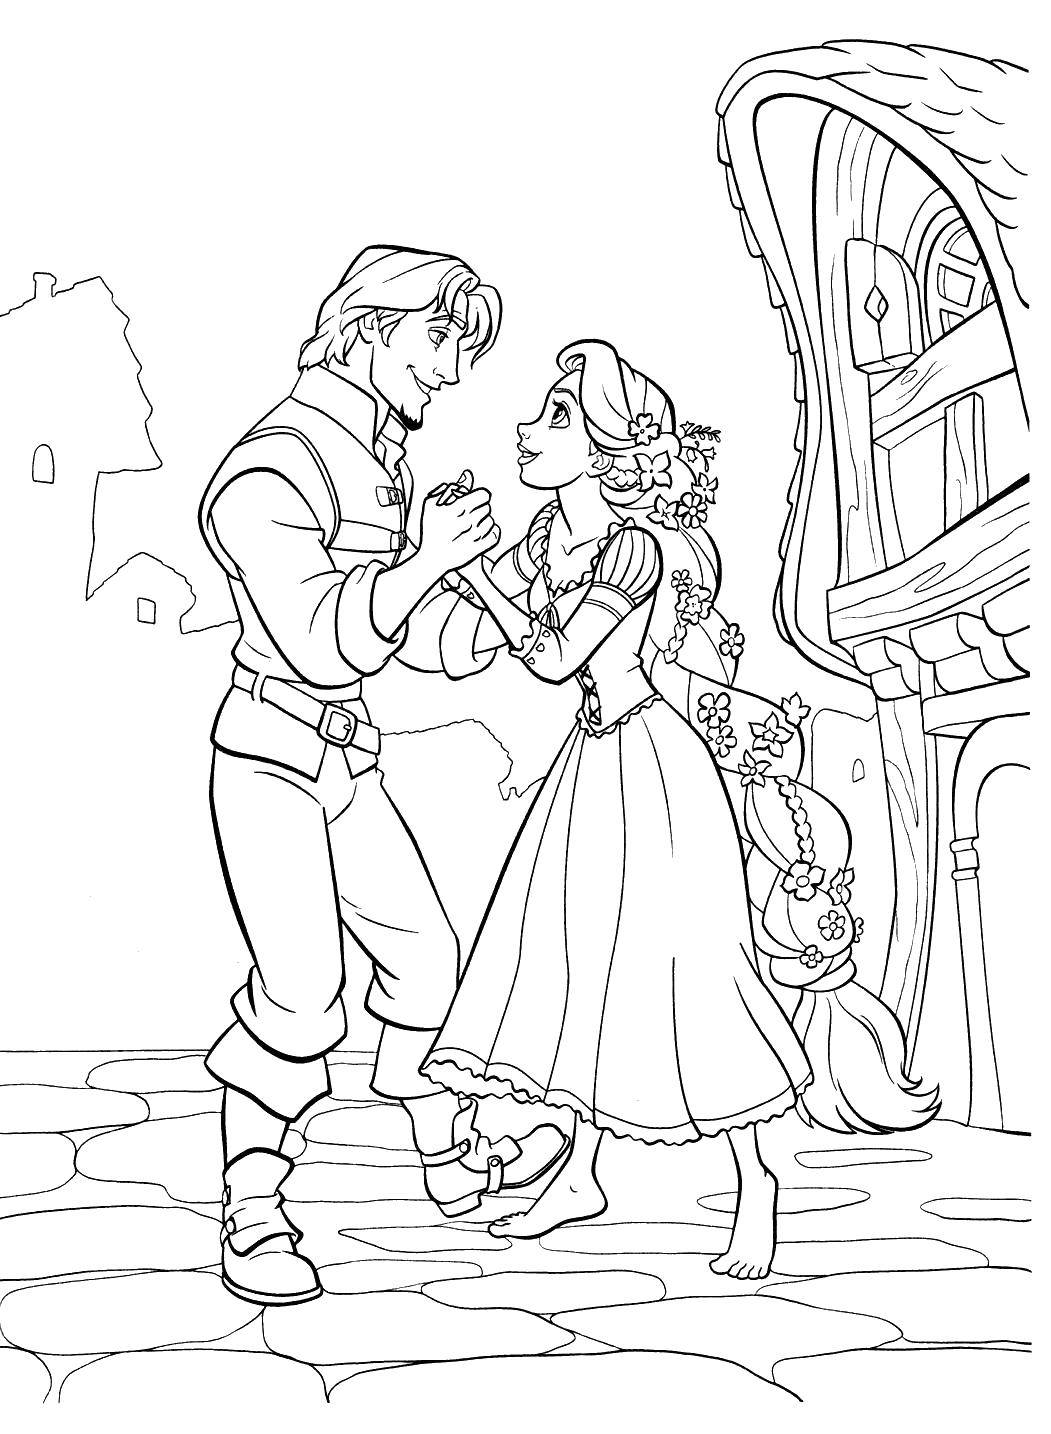 Coloring Elsa with her lover. Category coloring pages Rapunzel tangled. Tags:  Disney, Elsa, frozen, Princess.